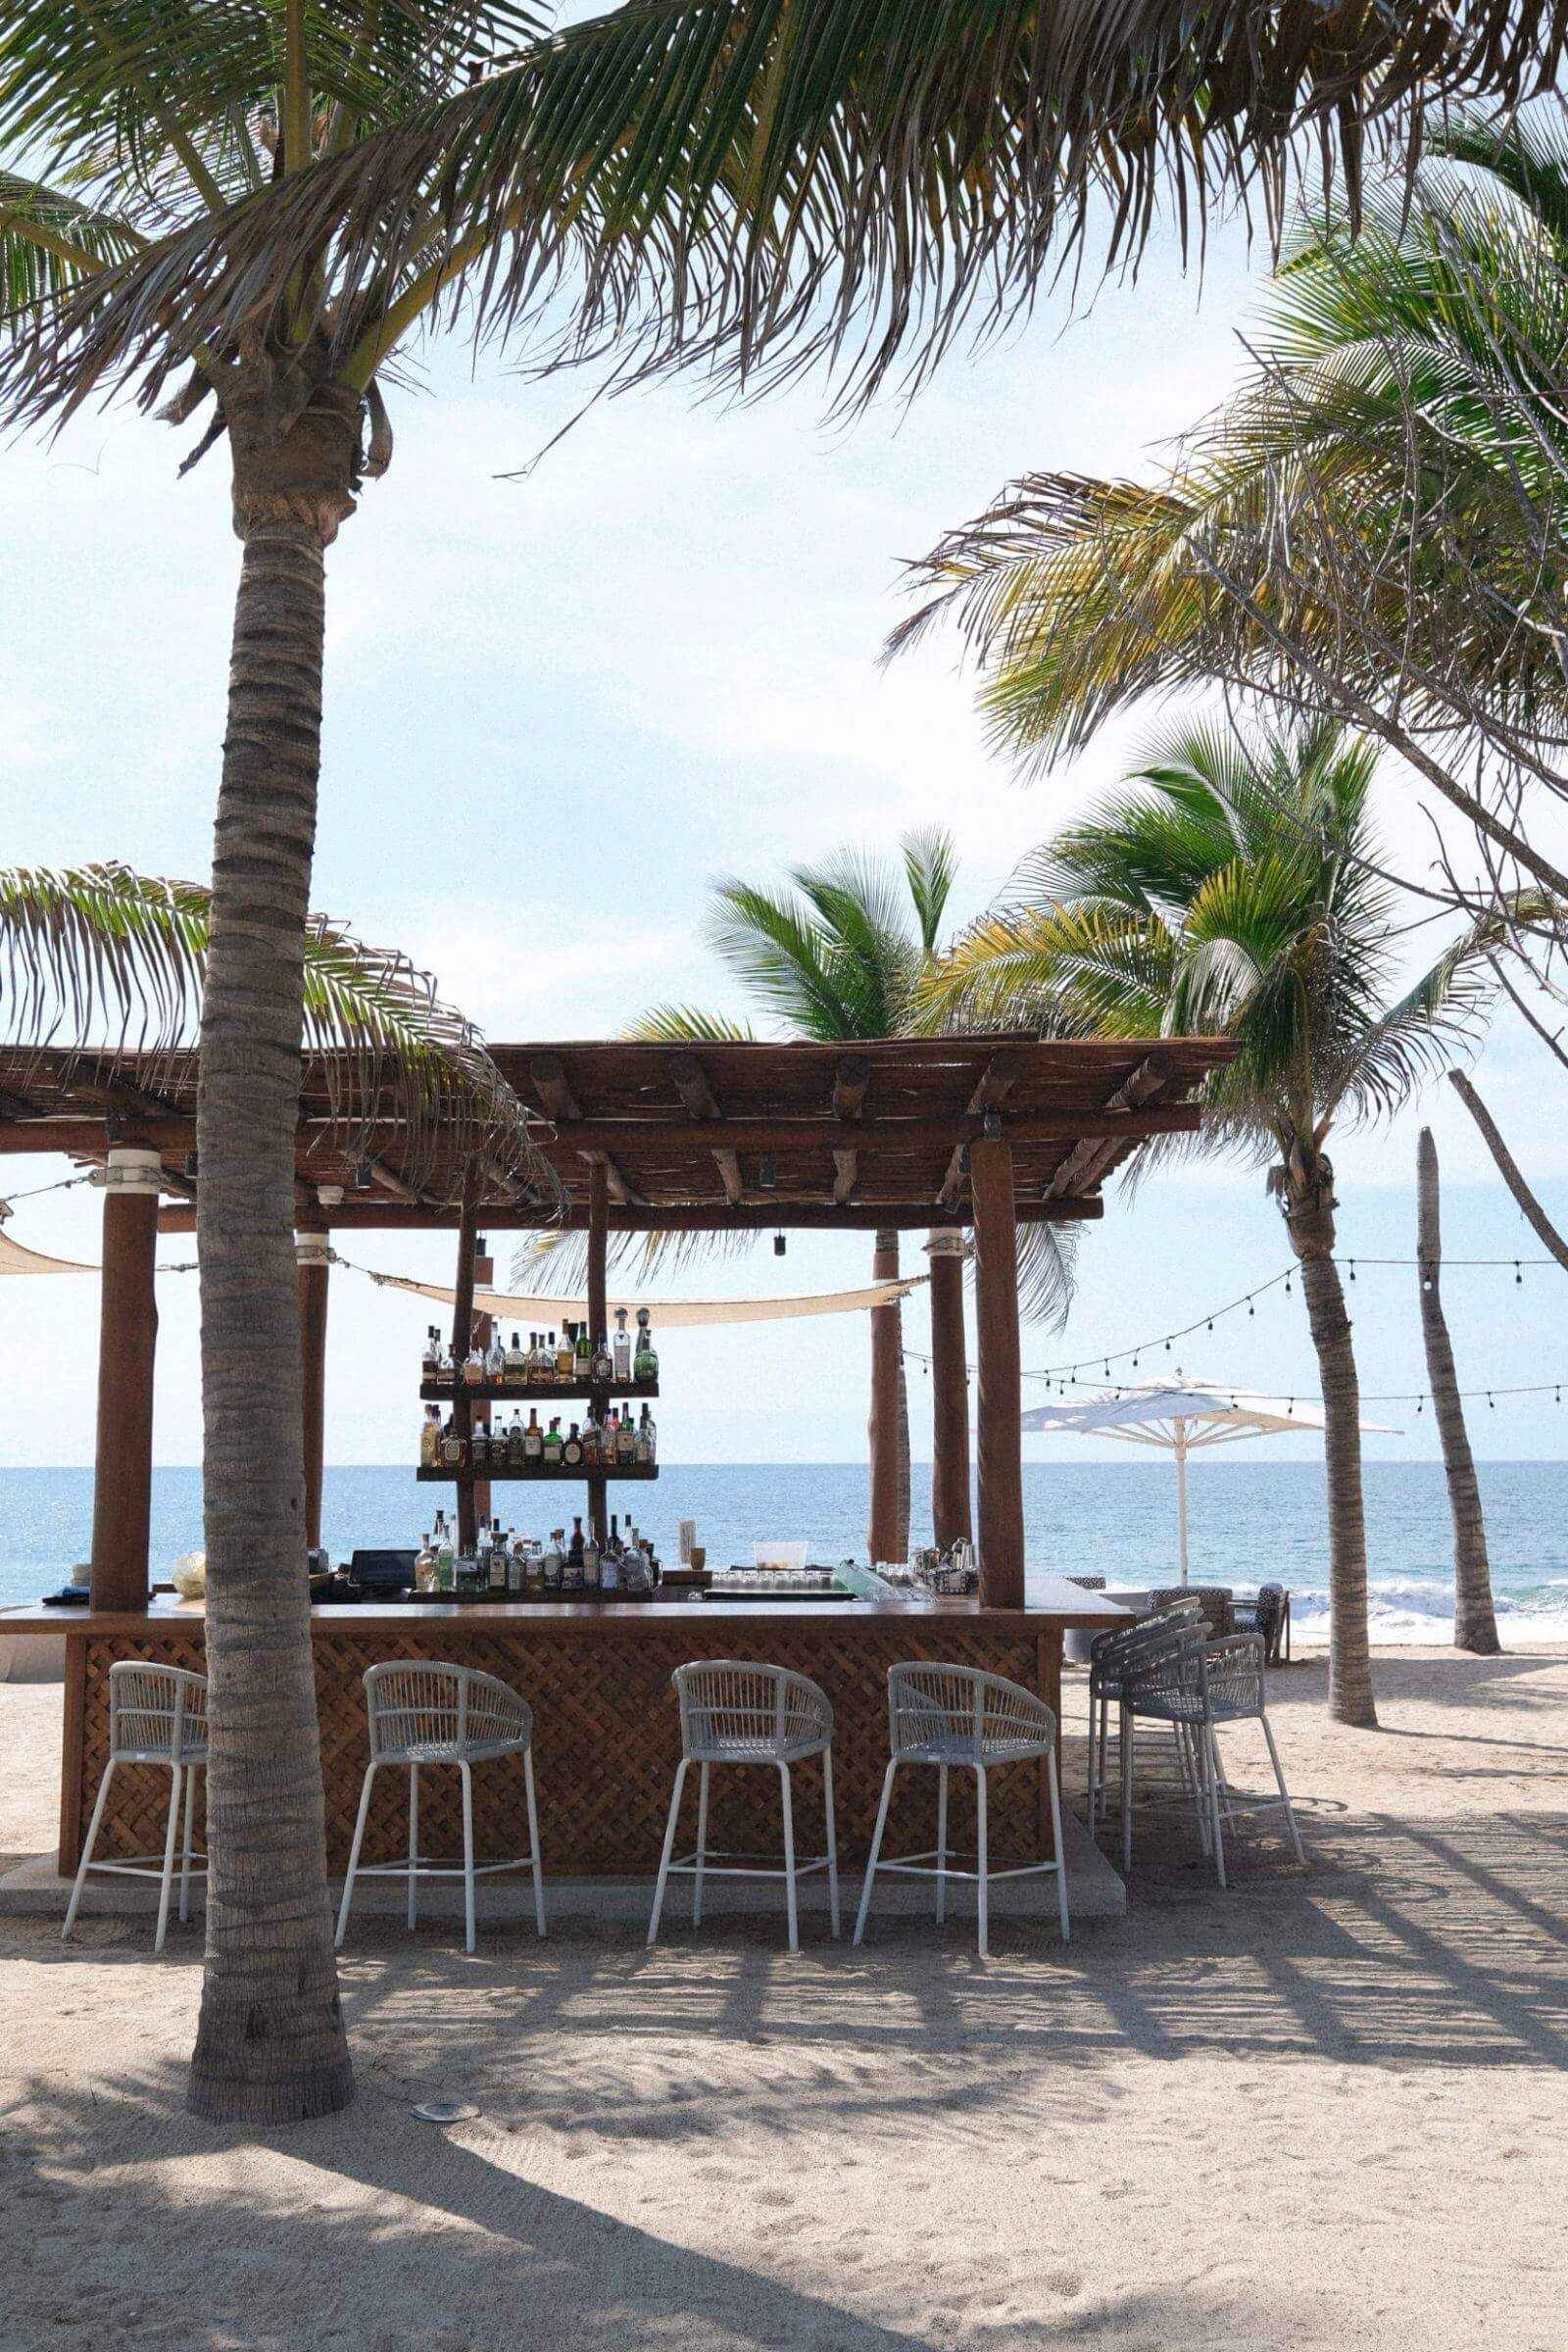 Picture of the bar counter with chairs on the beach